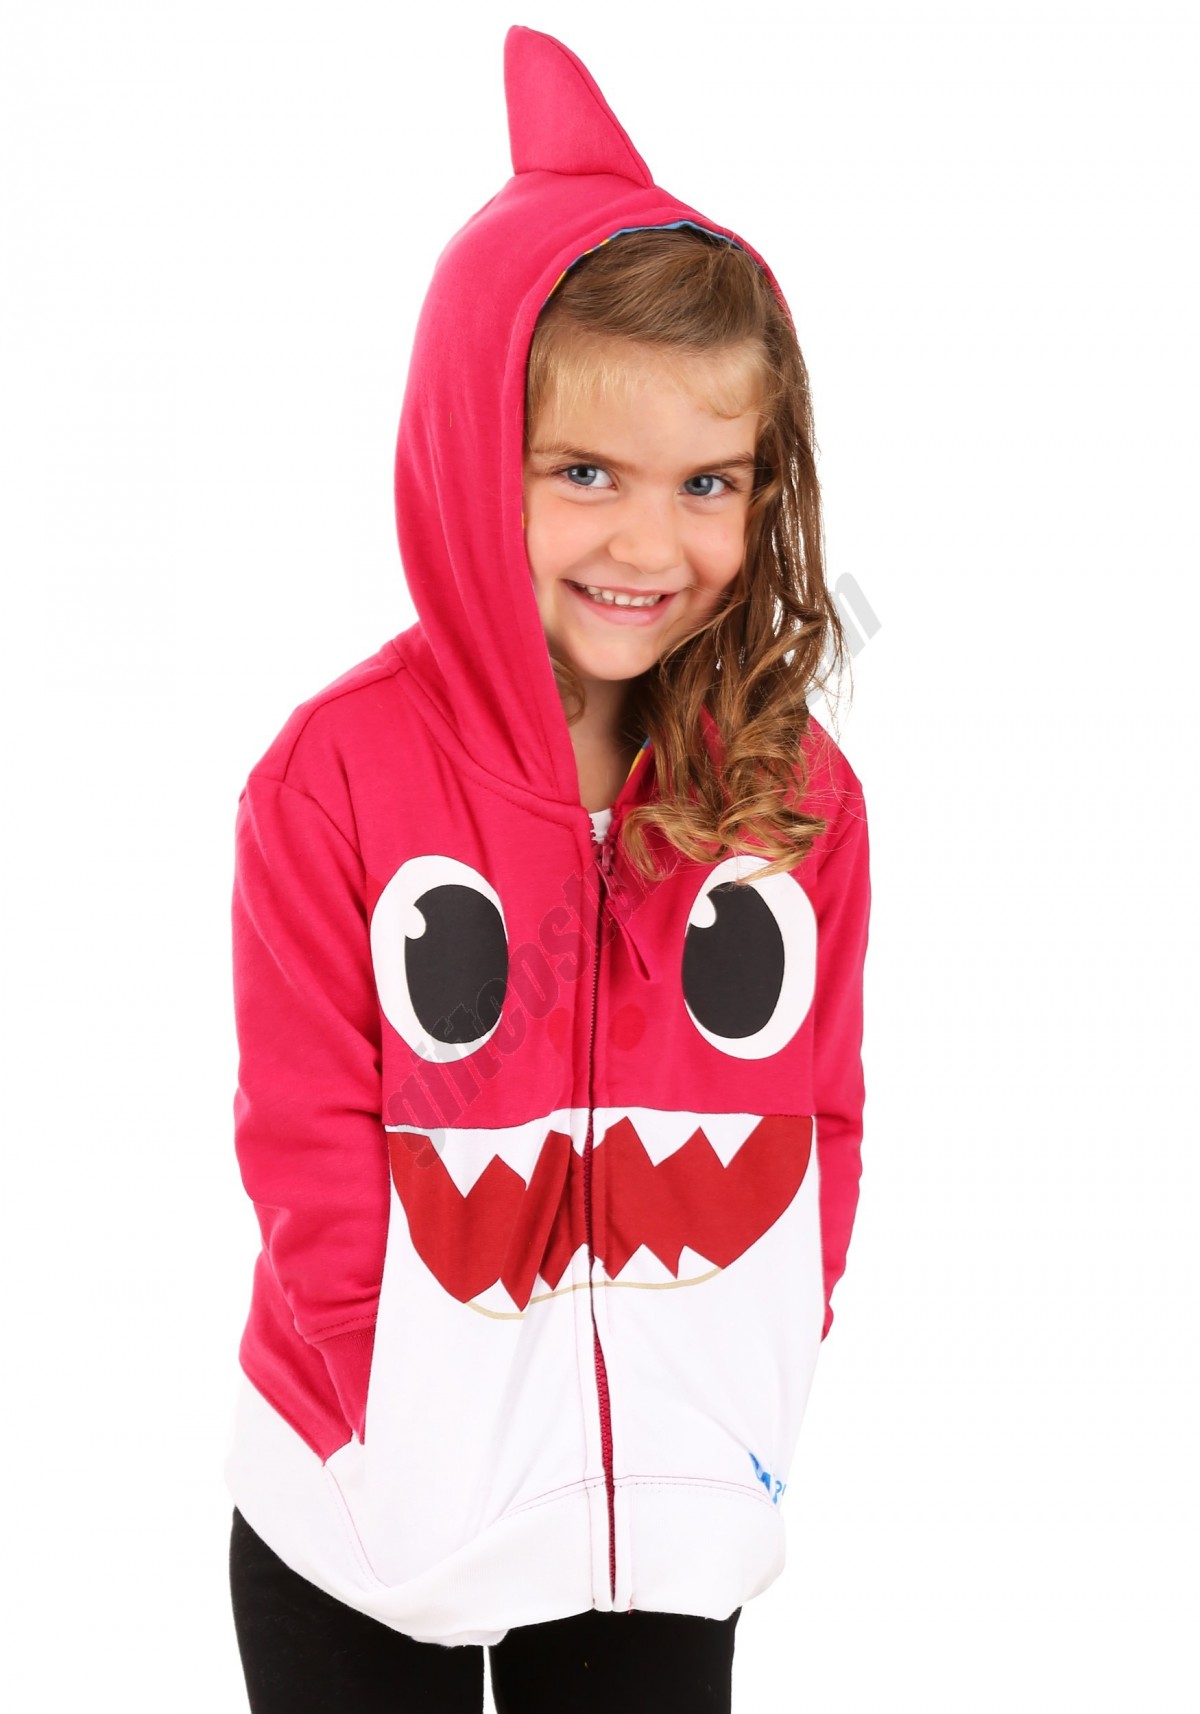 Baby Shark Costume Pink Hoodie for Toddlers Promotions - -0